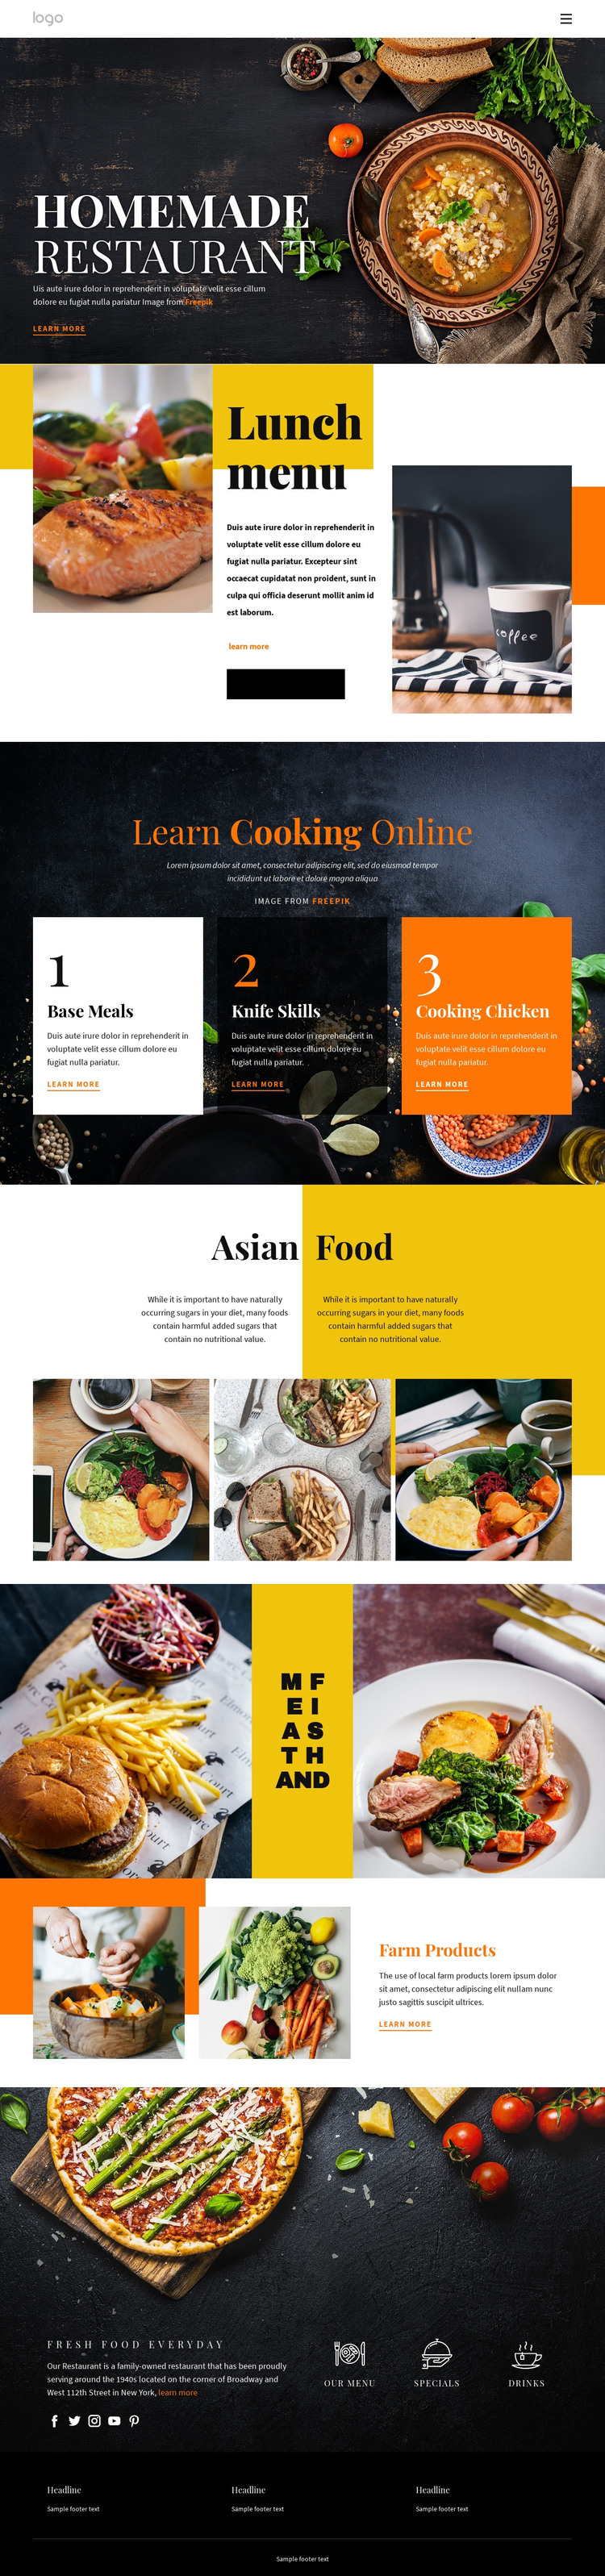 Better than home food Homepage Design